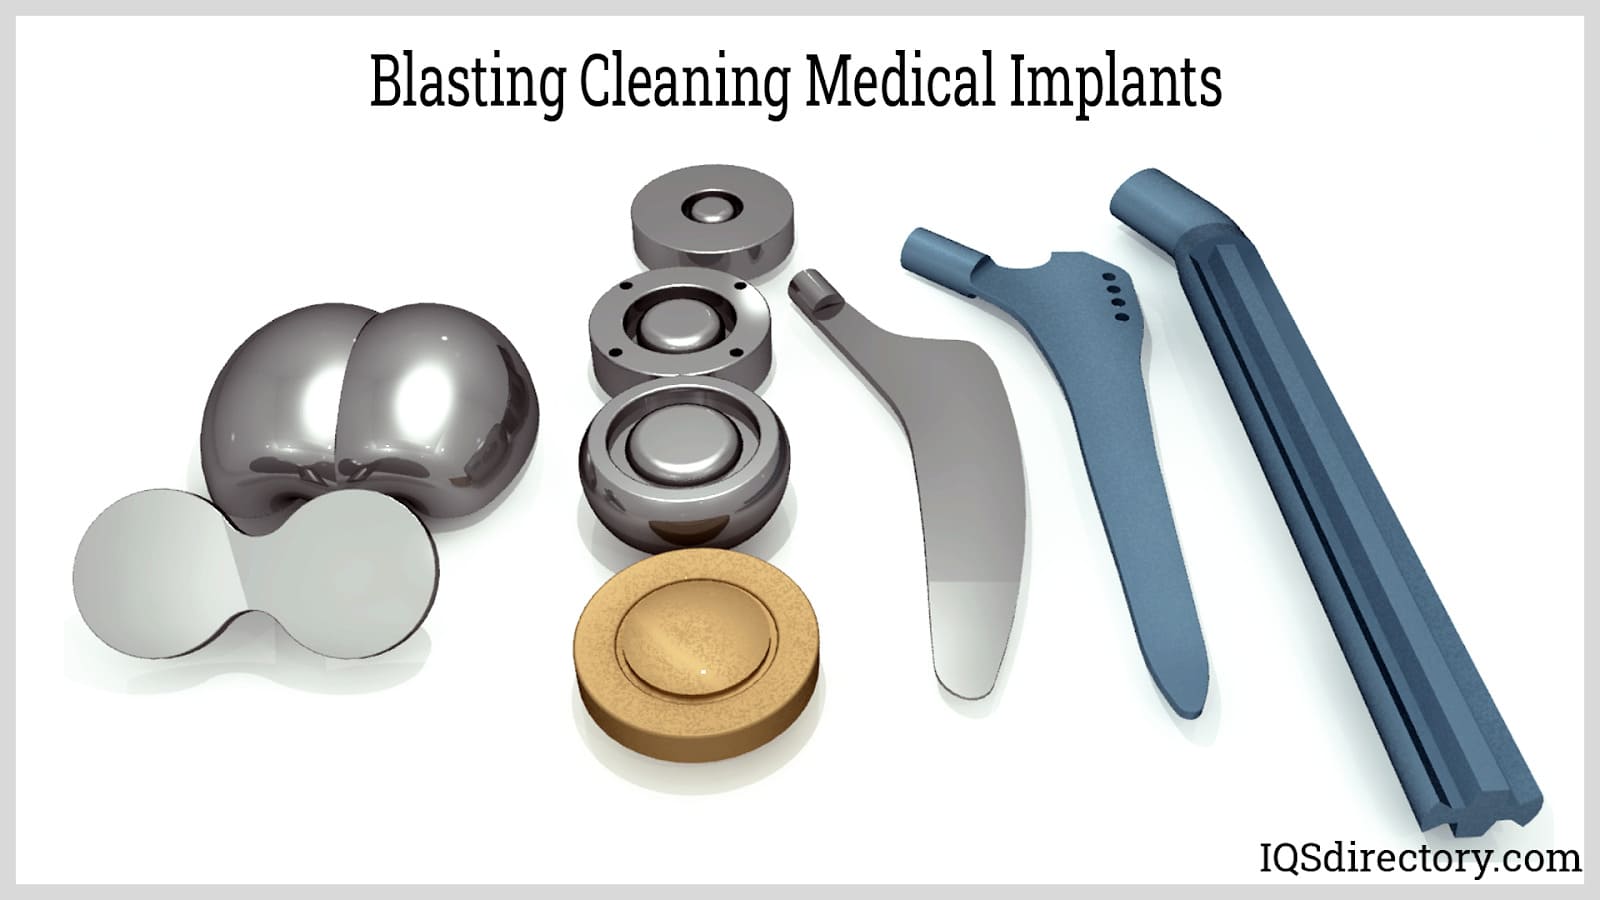 Blasting Cleaning Medical Implants